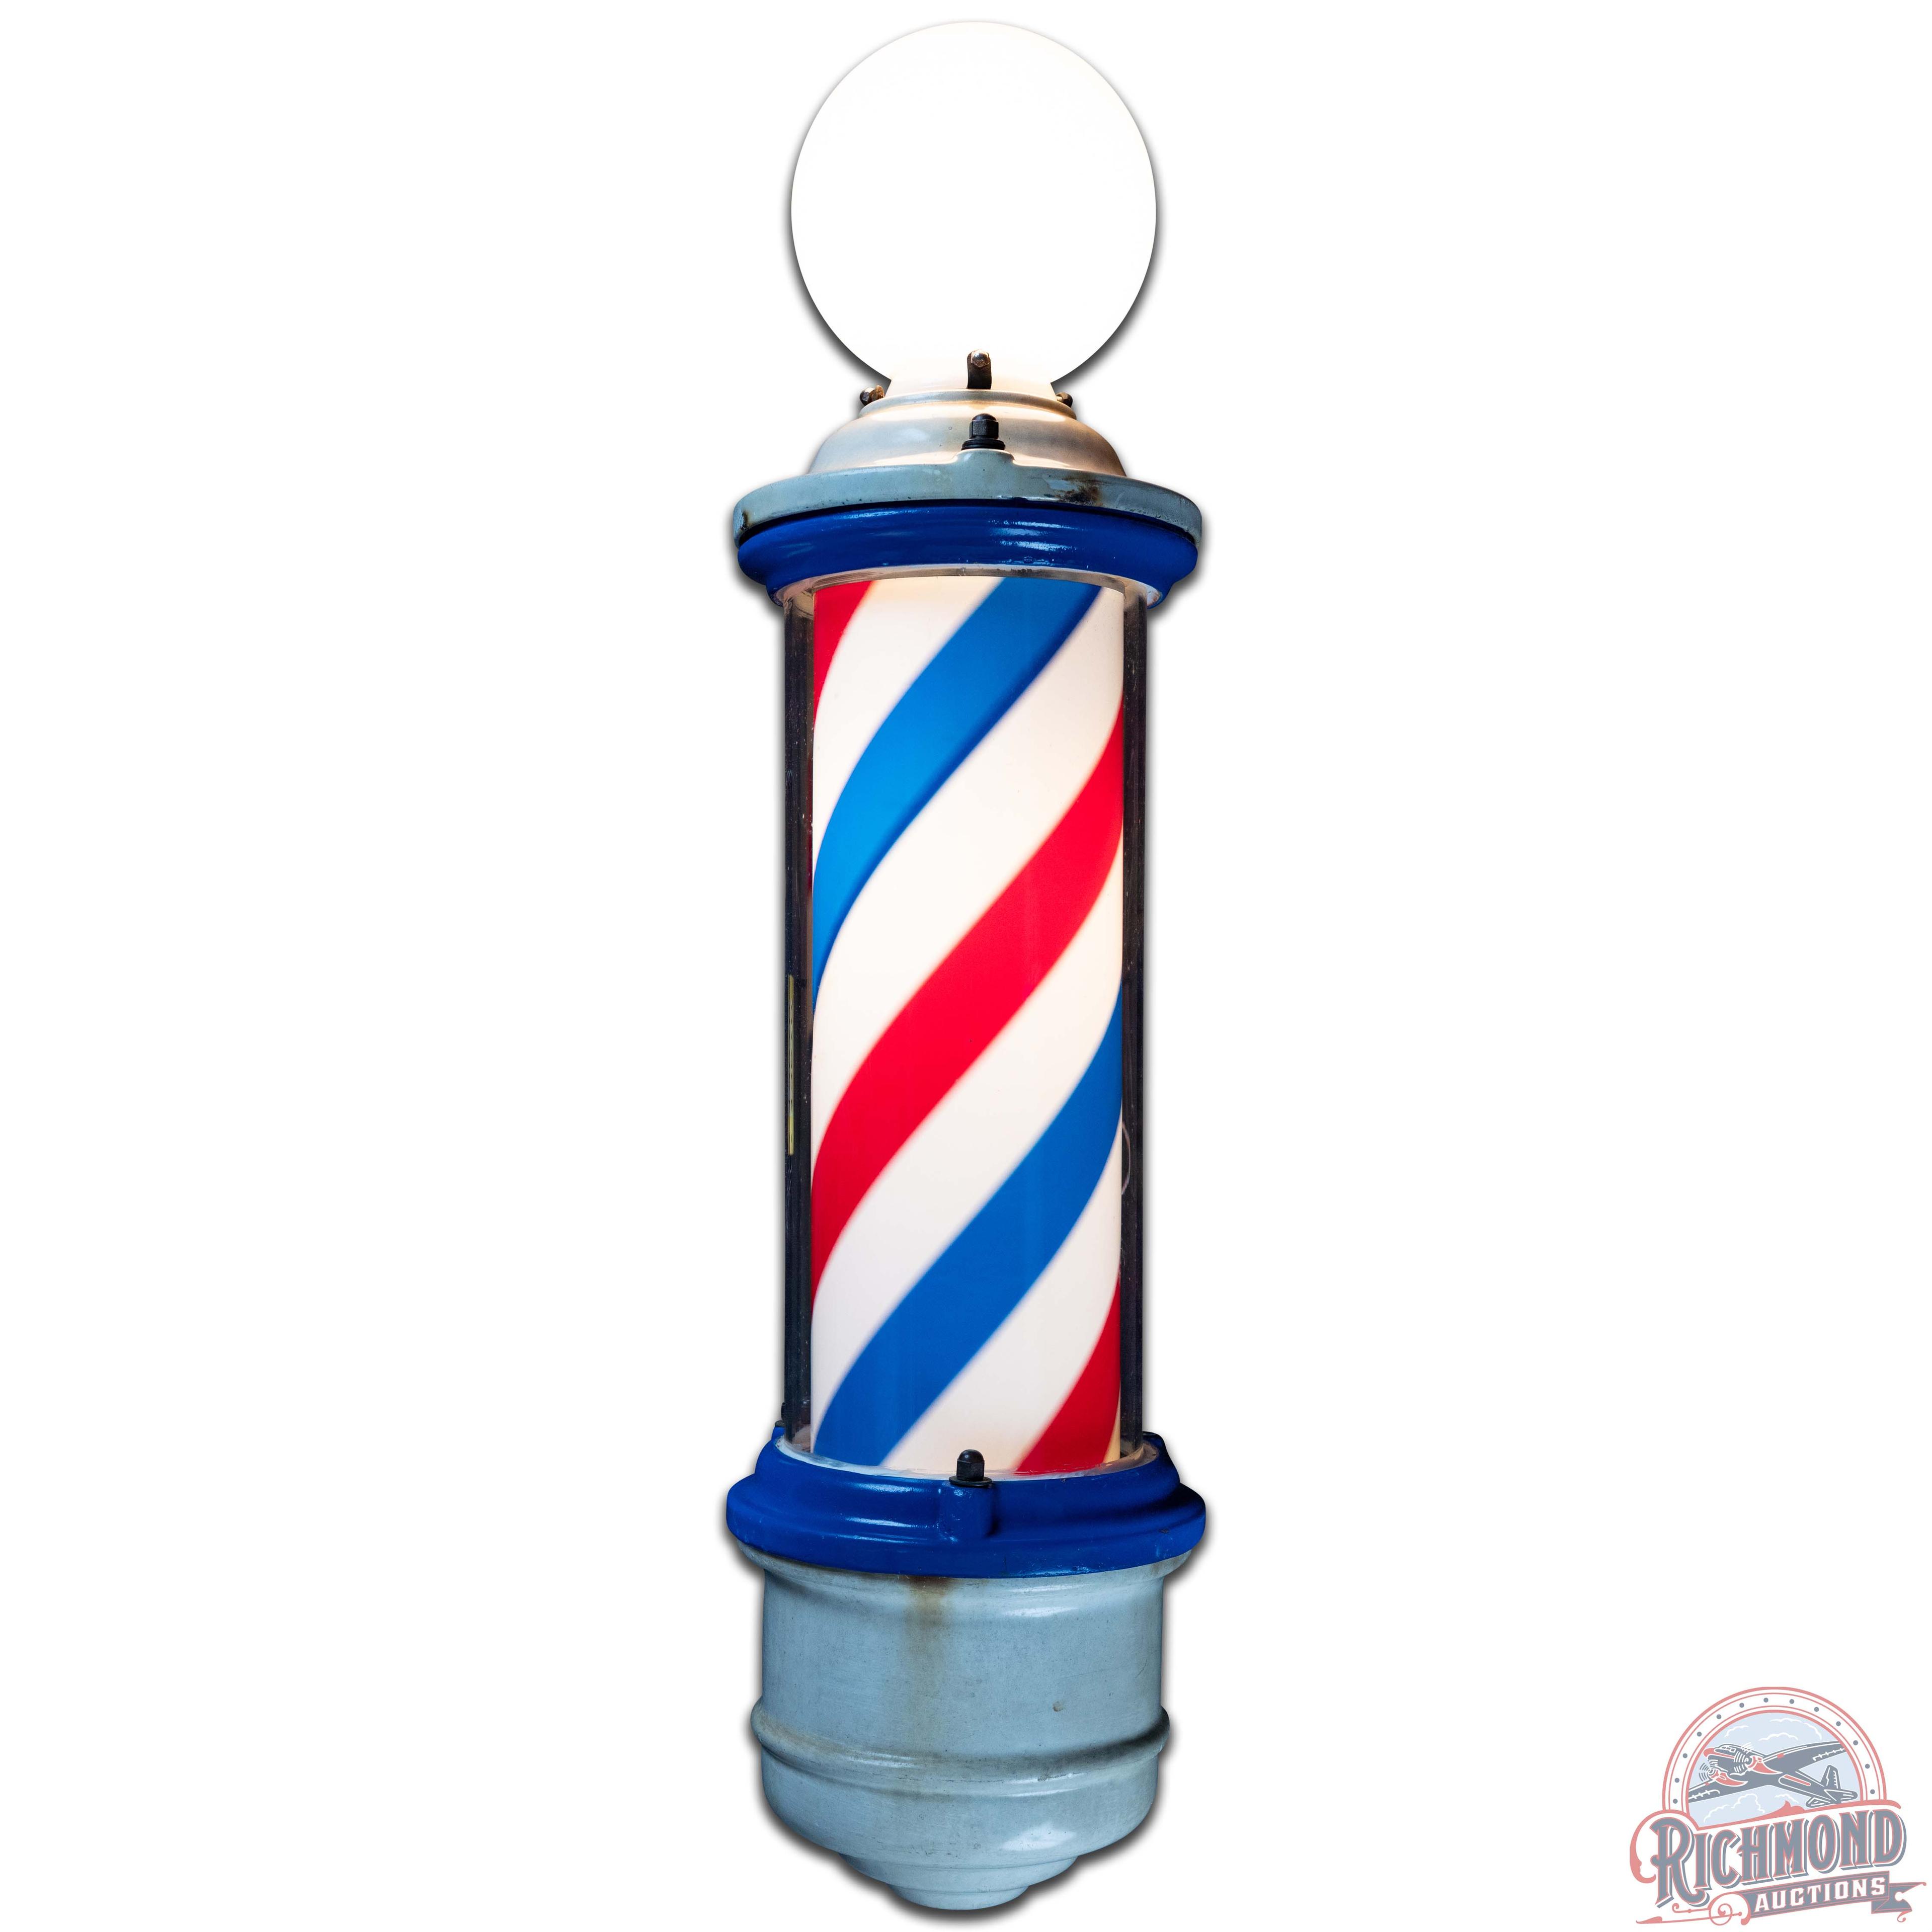 Lighted Wall Mount Glass Barber Pole with Motion